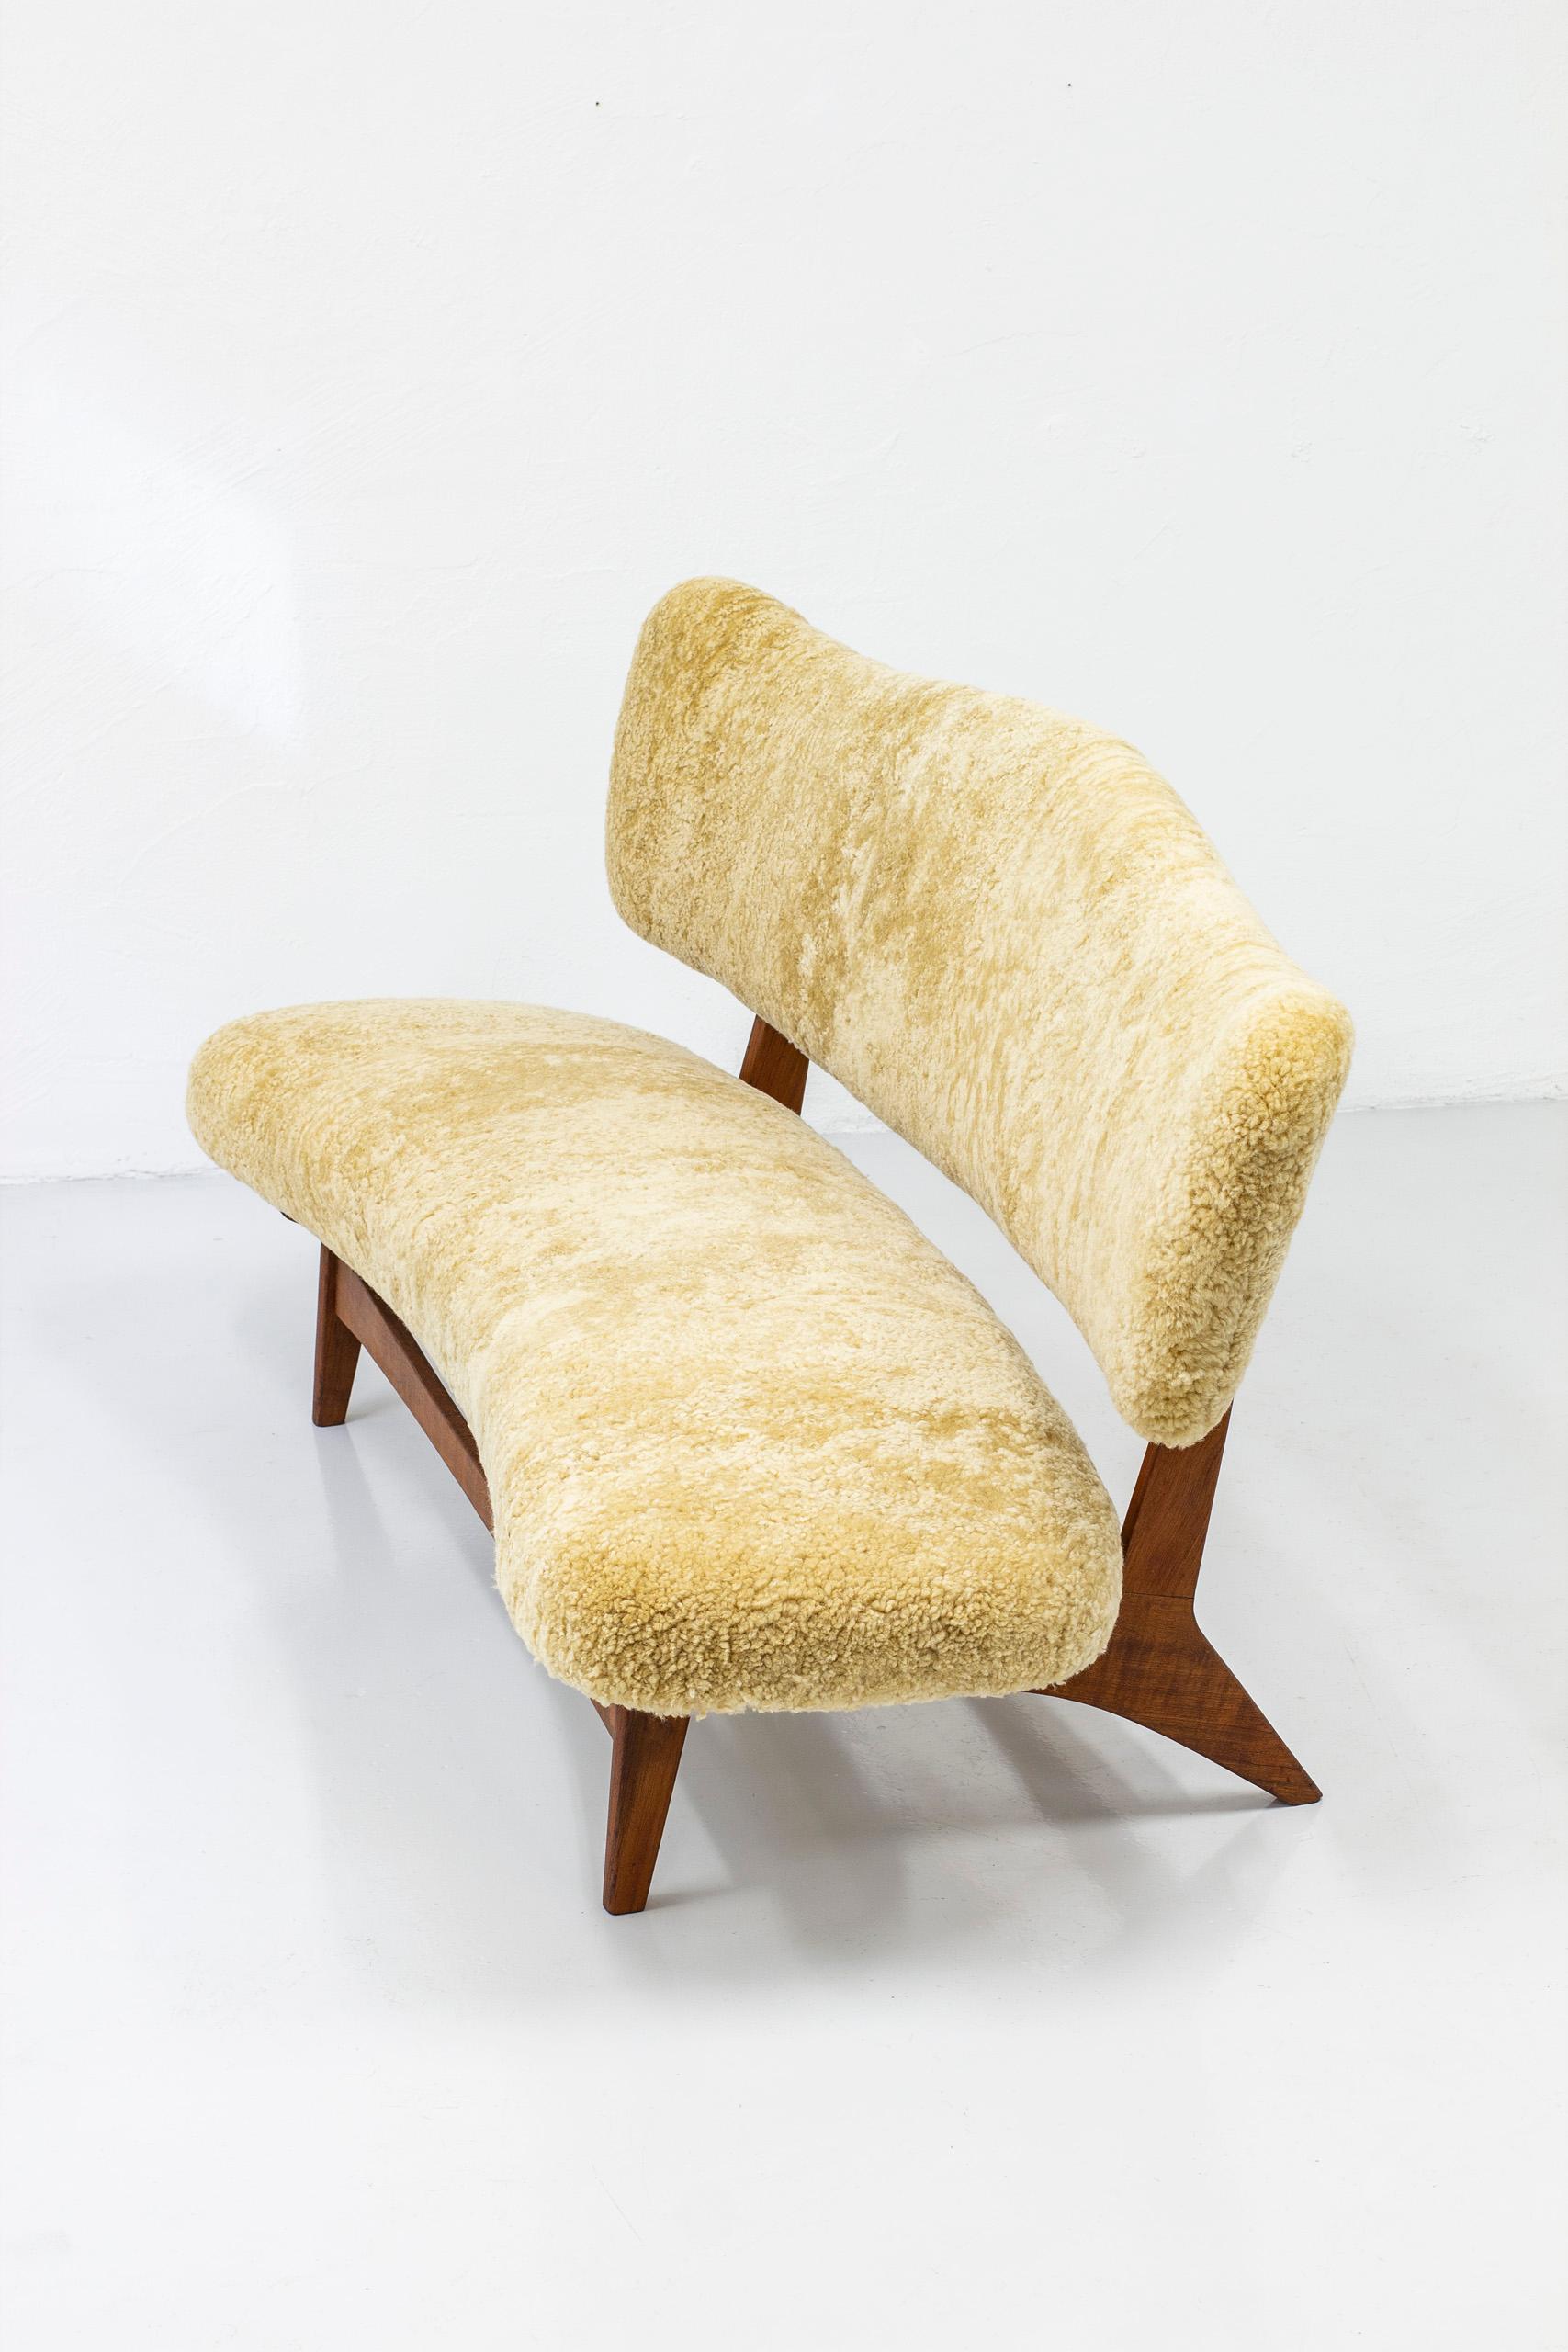 Scandinavian Modern Rare Sofa in Sheep Skin by Sigurd Resell for Rastad & Relling, Norway, 1950s